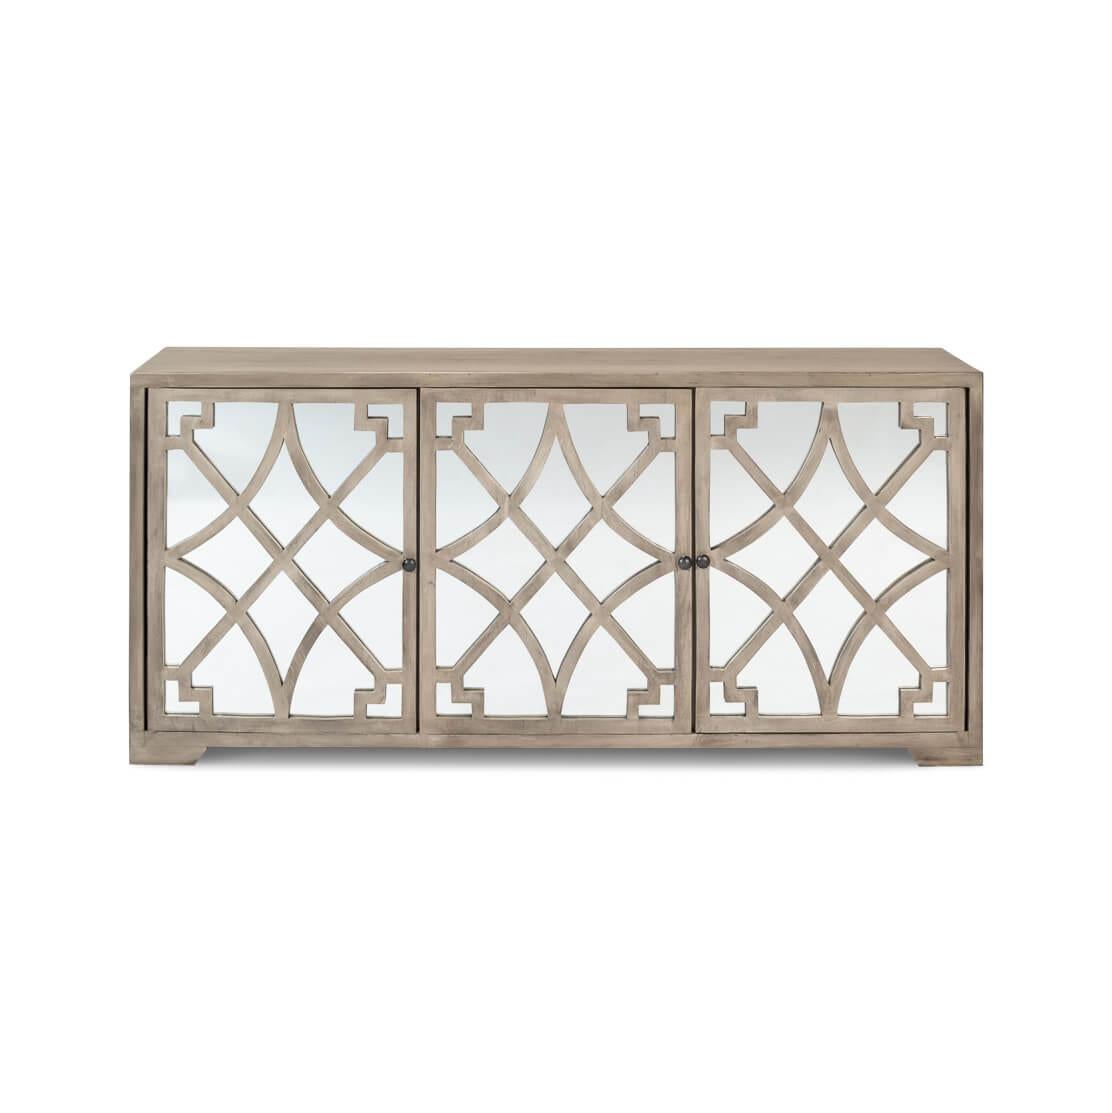 The eye is drawn to the symmetrical lattice woodwork on the mirrored doors, a feature that amplifies light and adds depth to any room.

The natural wood finish lends a grounded, earthy feel to the piece, providing a beautiful contrast to the